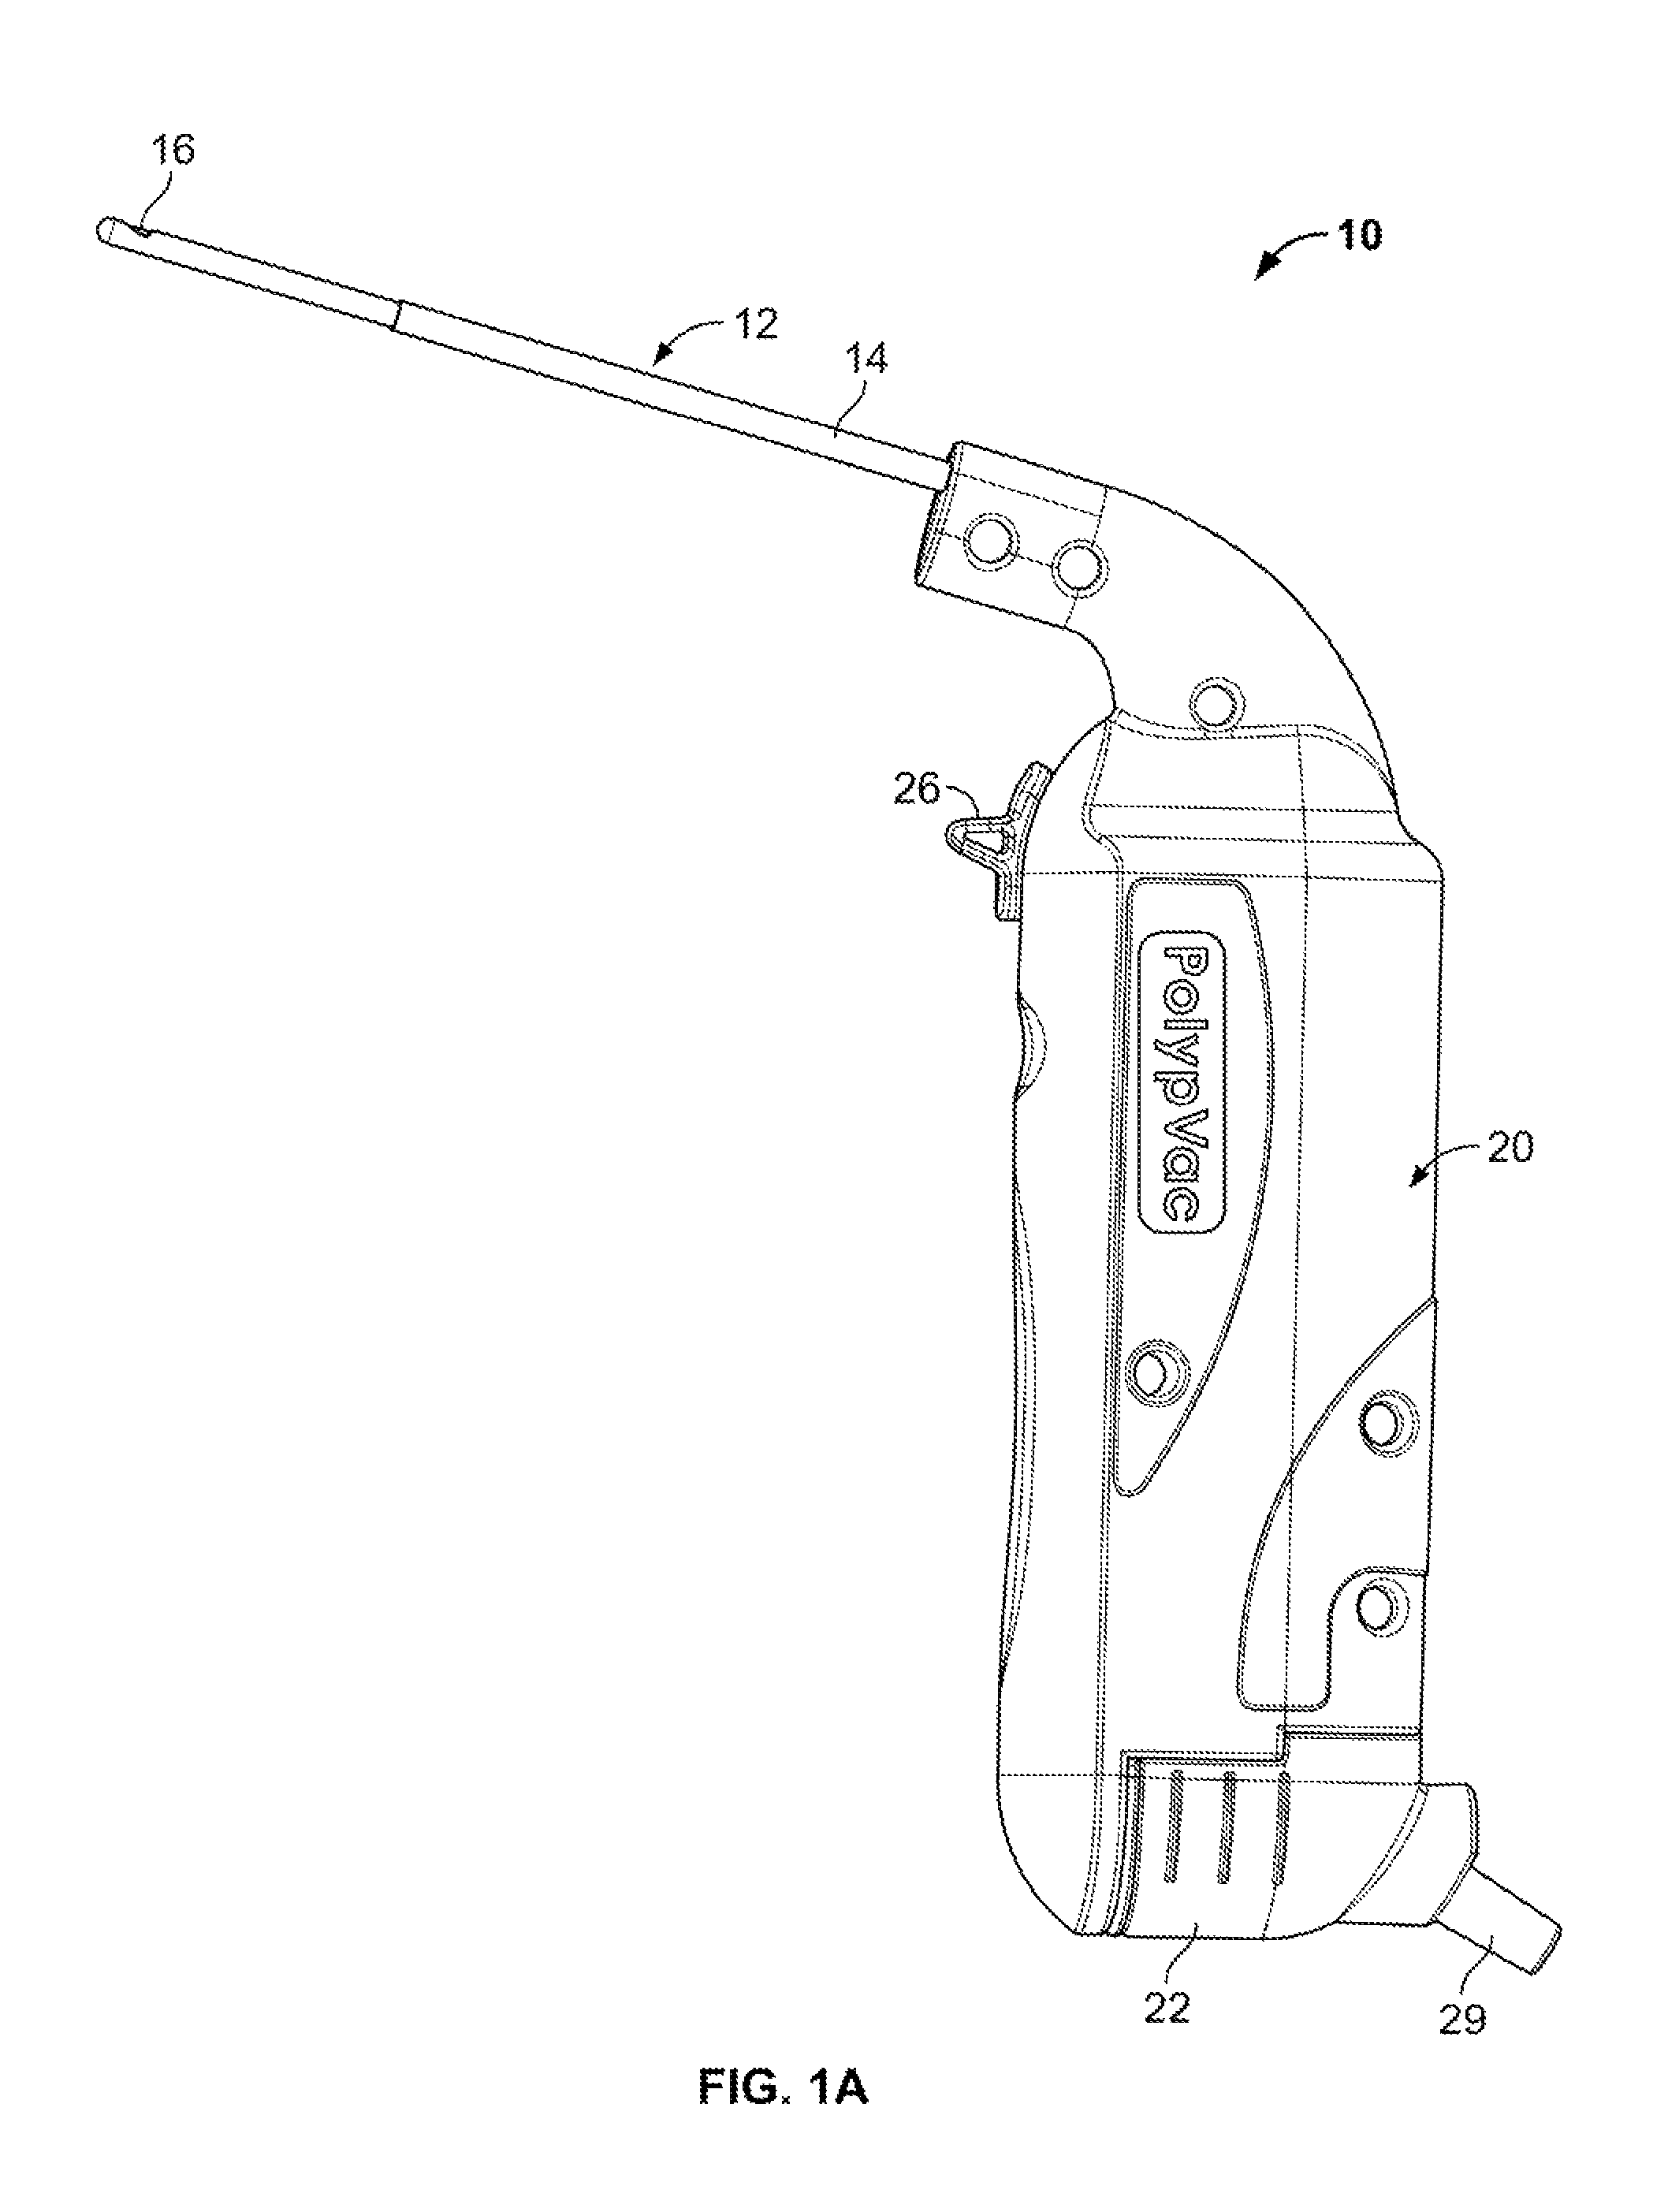 Devices and methods for cutting tissue